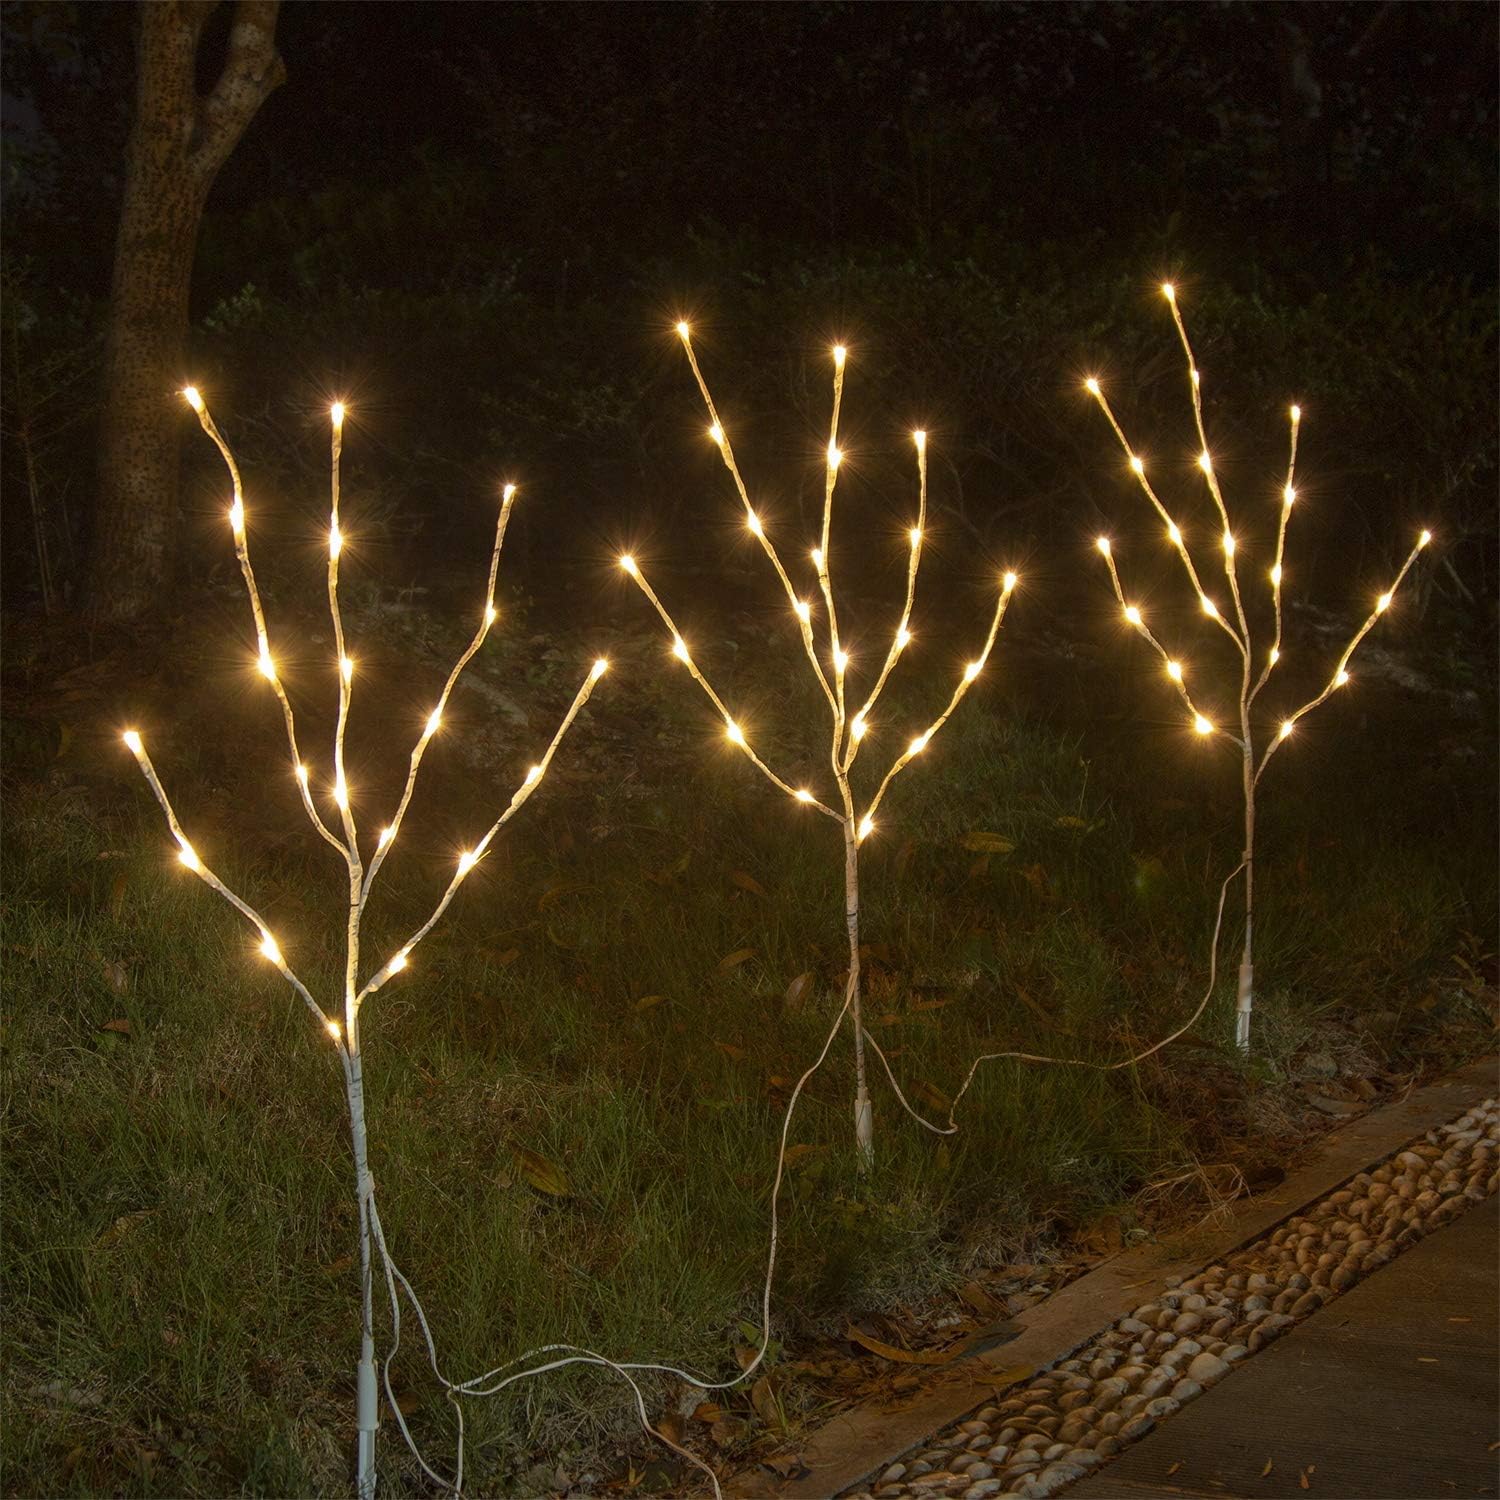 Home Decorative Twig Lights Lighted White Birch Twig Branches Pathway Stakes with 60 LED White Lights Waterproof Plug in for Outdoor and Indoor Decor (3PK, 76cm)